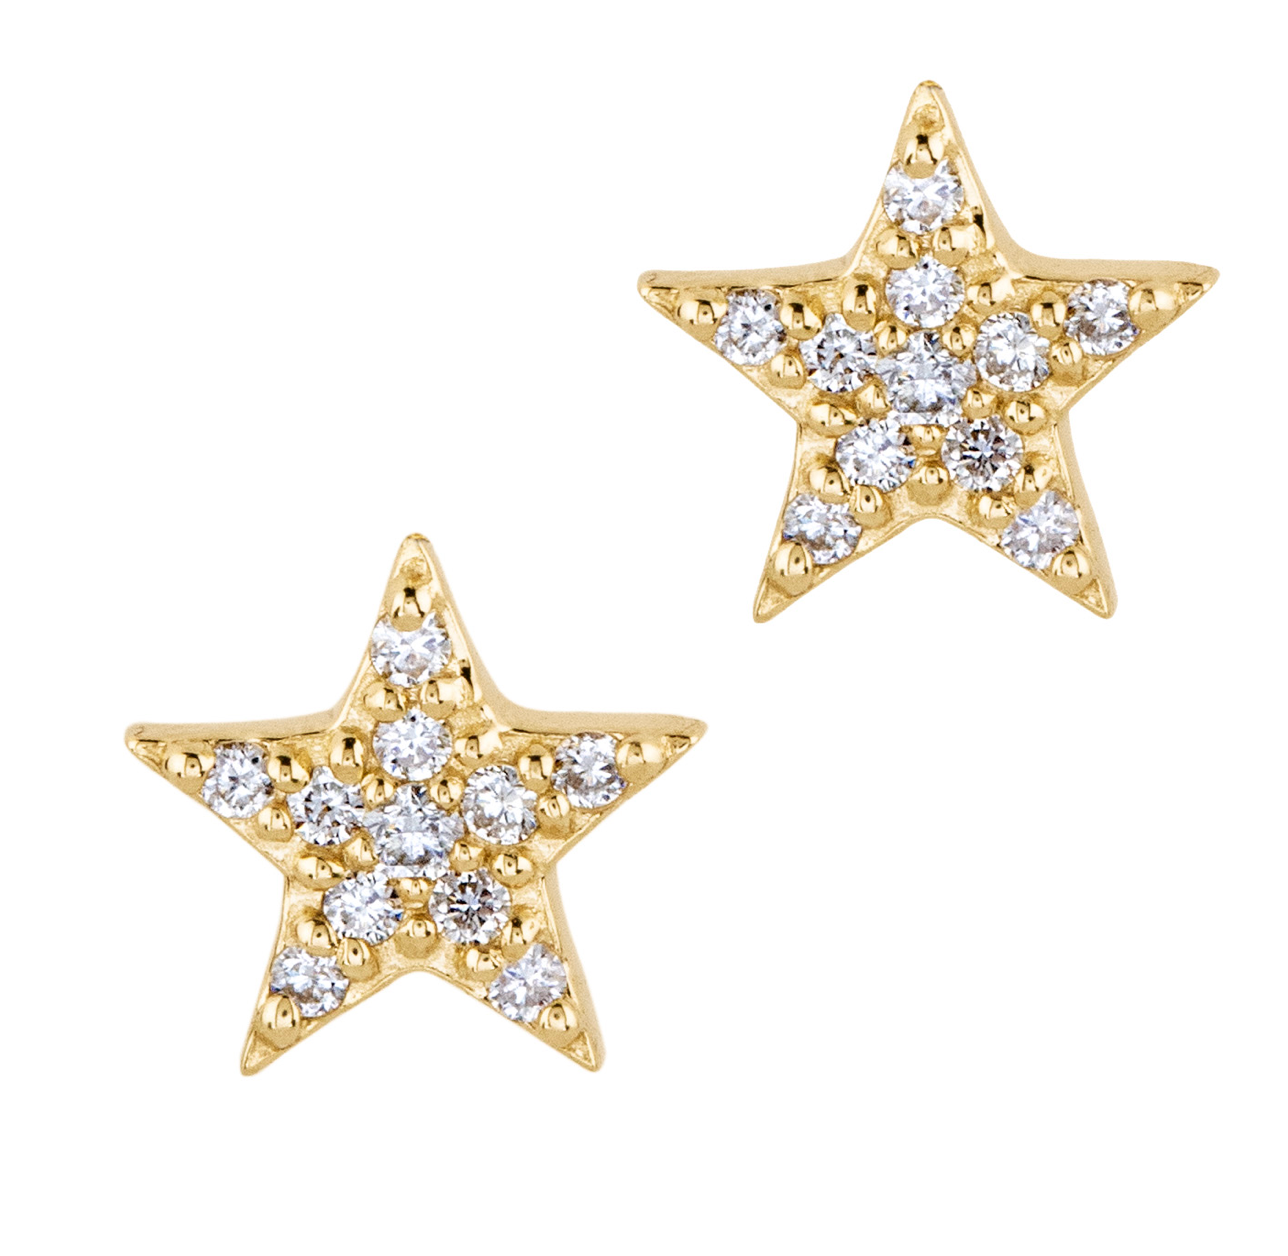 This diamond star stud can be used to layer or wear alone.  14K yellow gold 1 mm-1.5mm handset, full cut white diamond post back stud earring  sold as a single earring